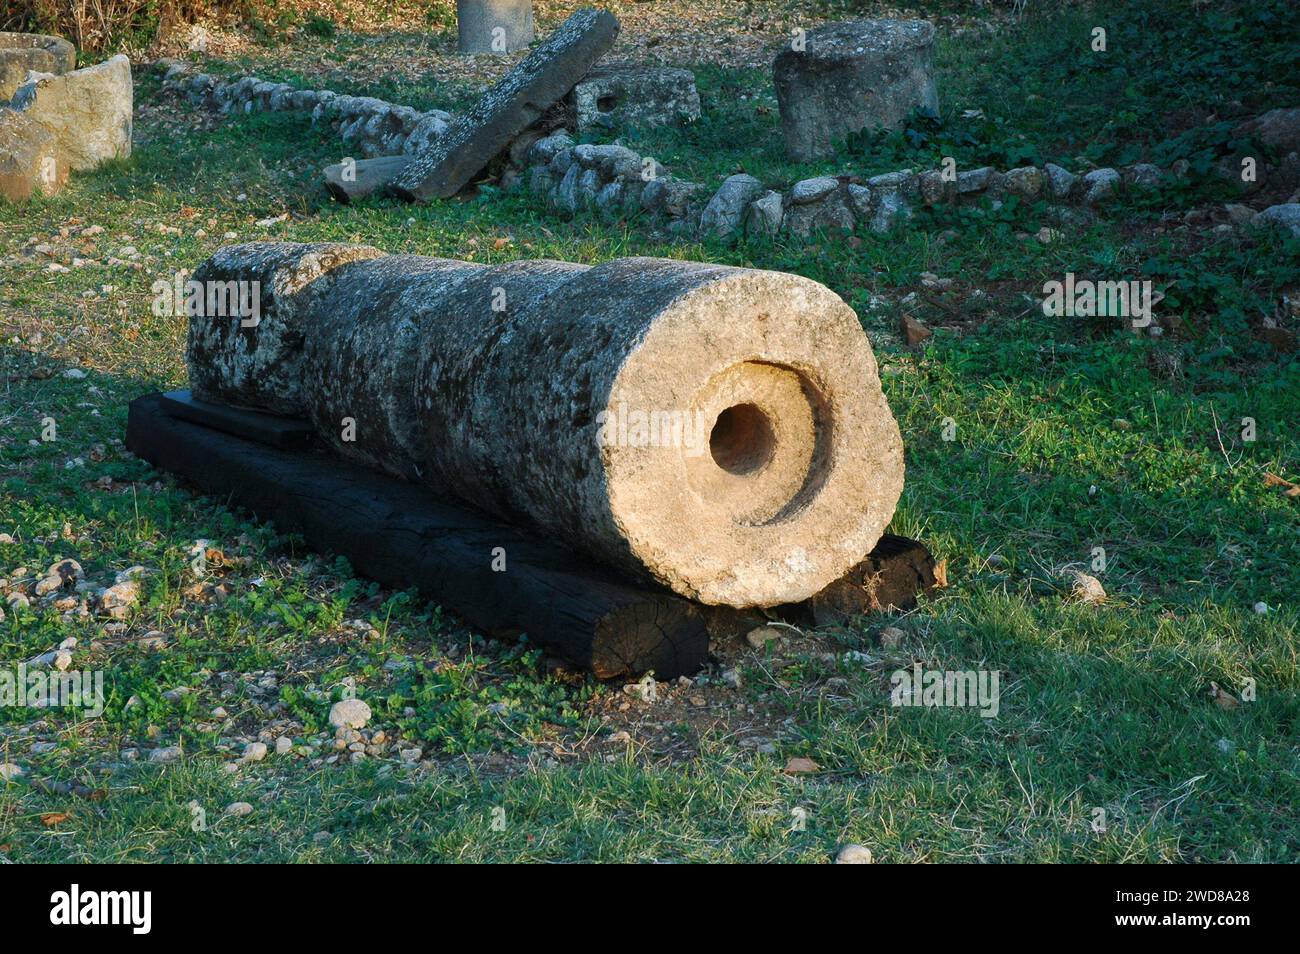 Marble columns and other archeological remains of an ancient city in northern Israel at the foot of Mount Hermon known as Banias or Banyas. Stock Photo